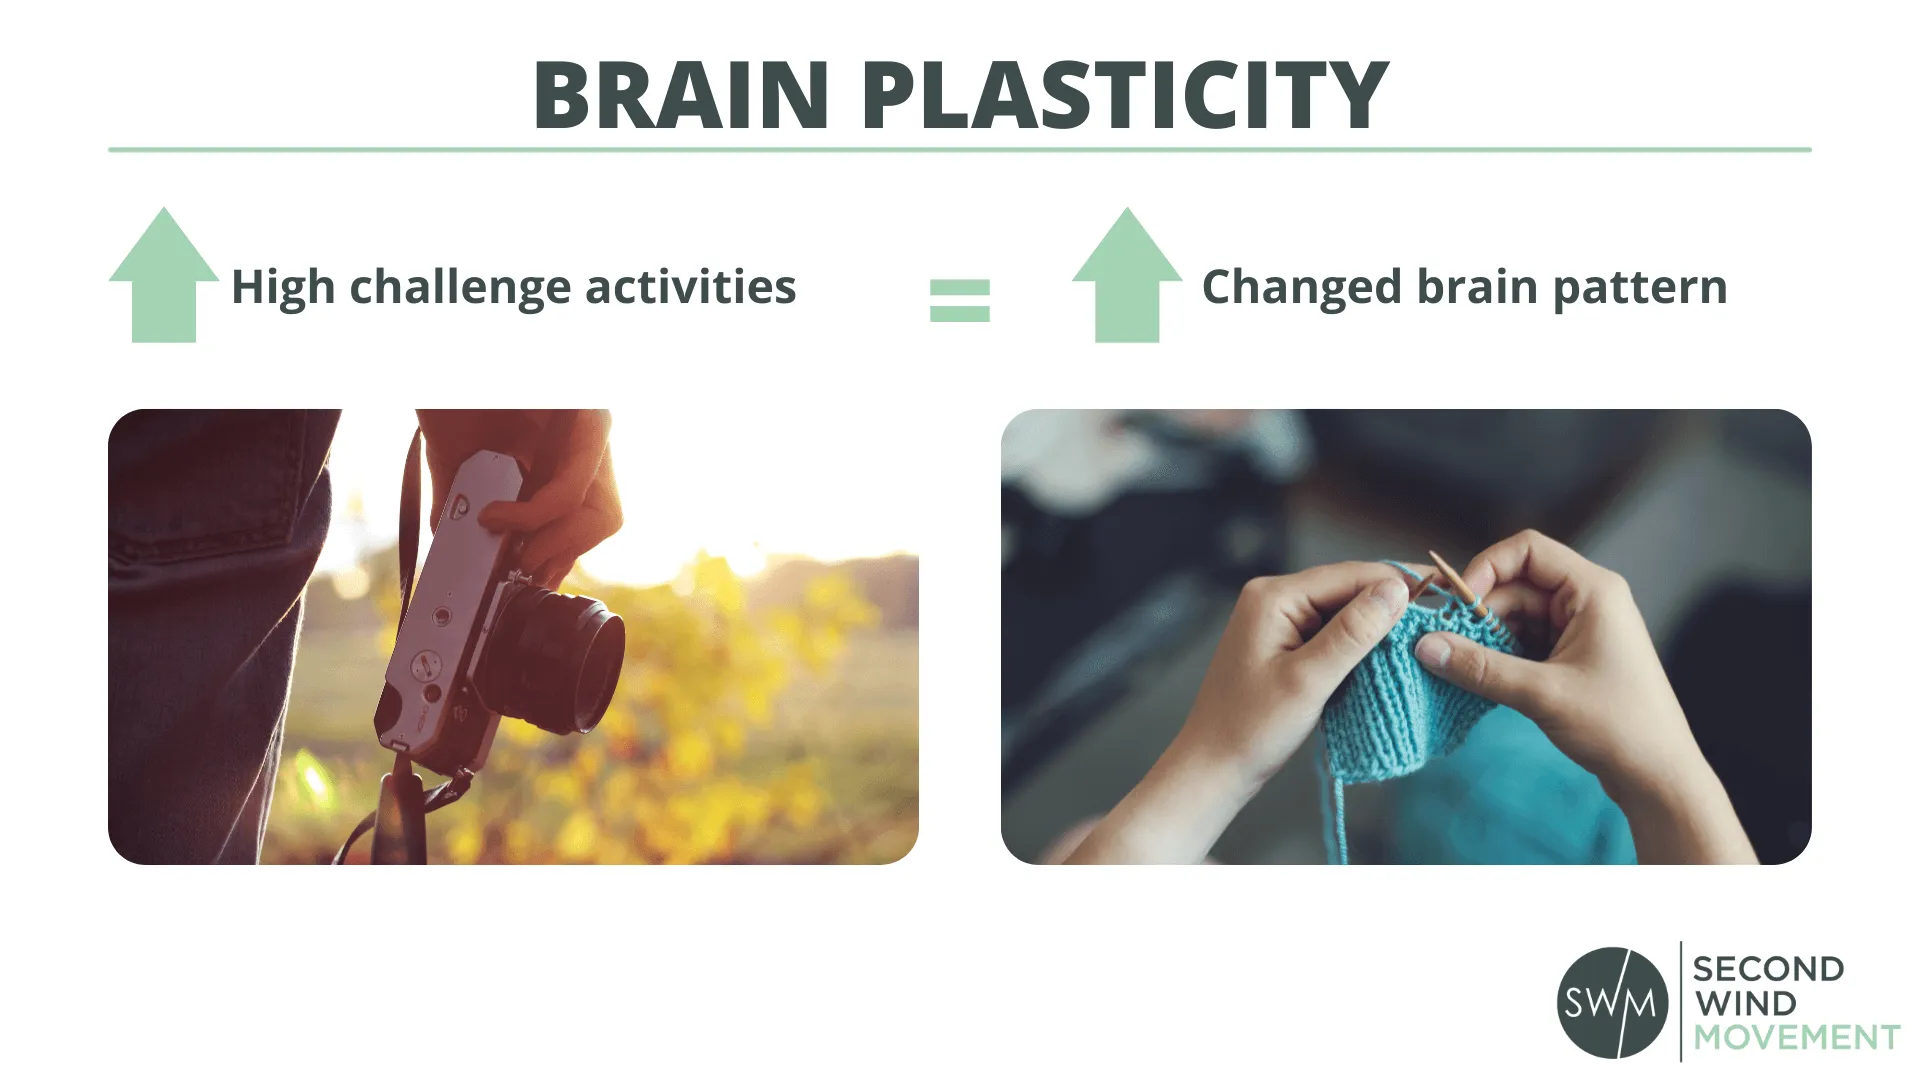 high challenge activities change your brain patterns and increase brain plasticity